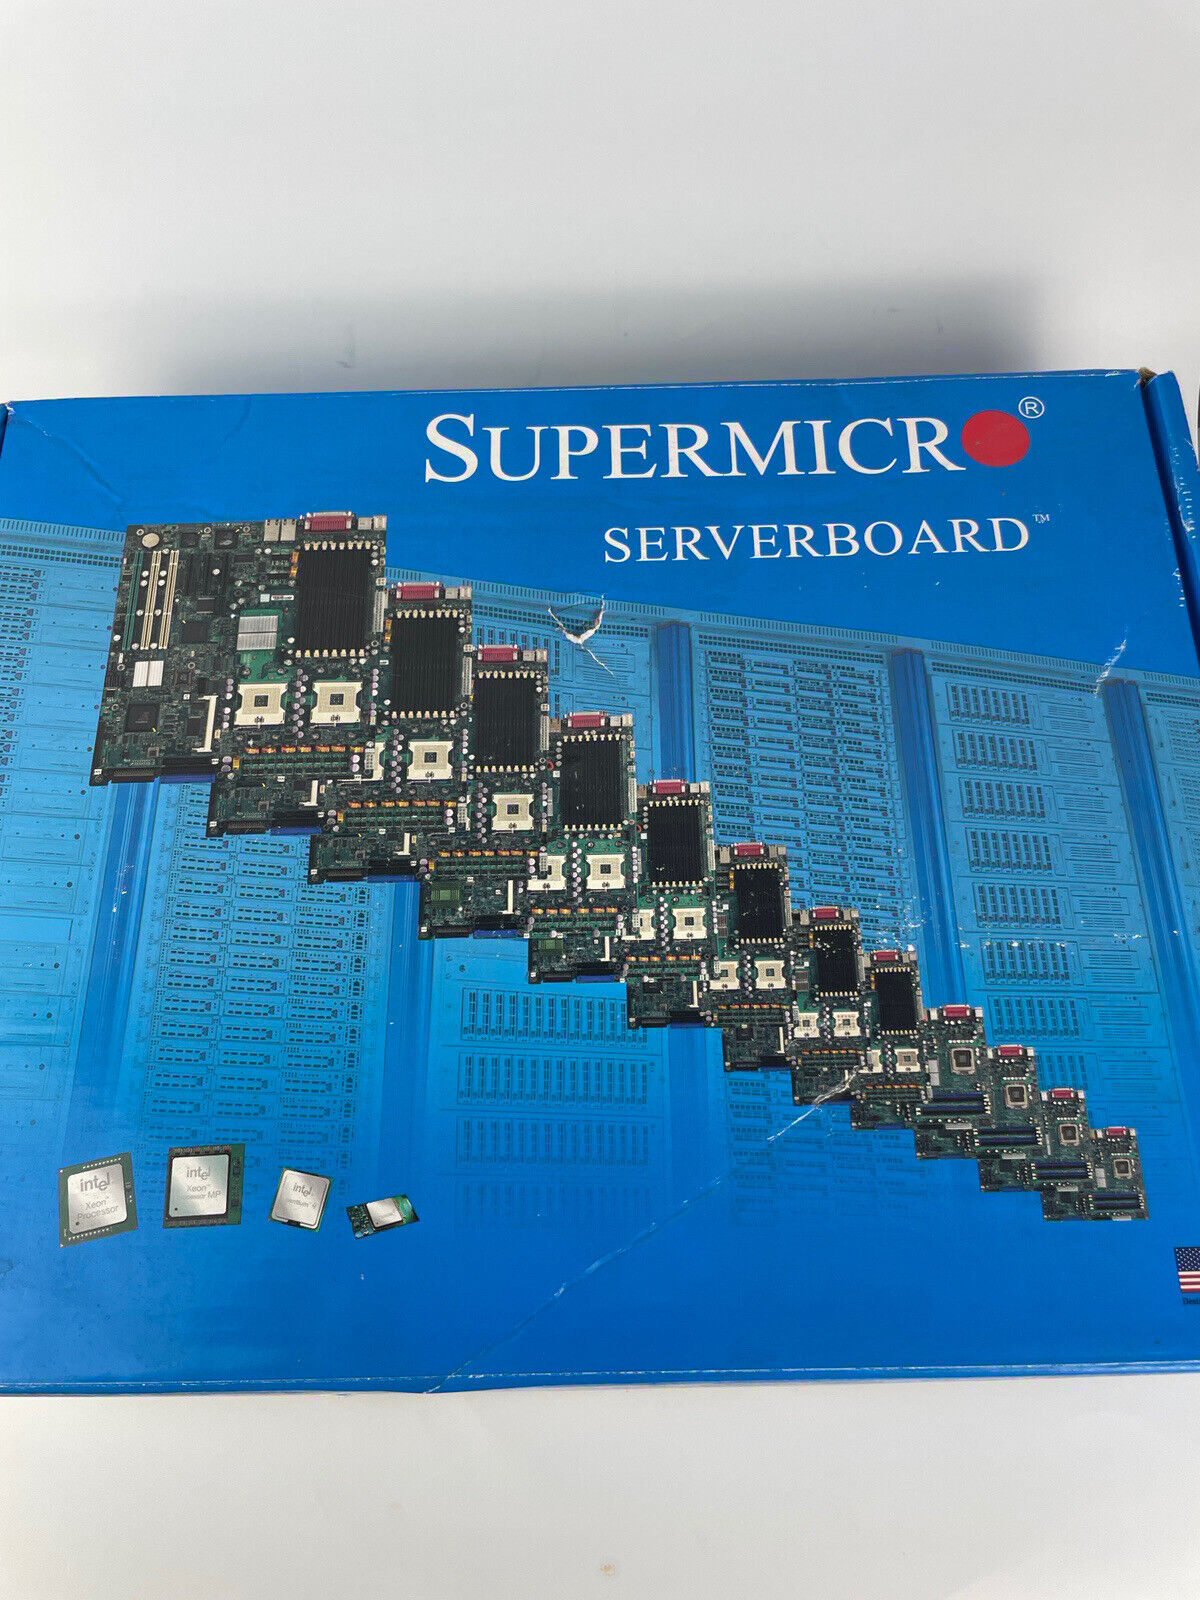 Supermicro Serverboard Lightly used. Contains all its parts with user manual.